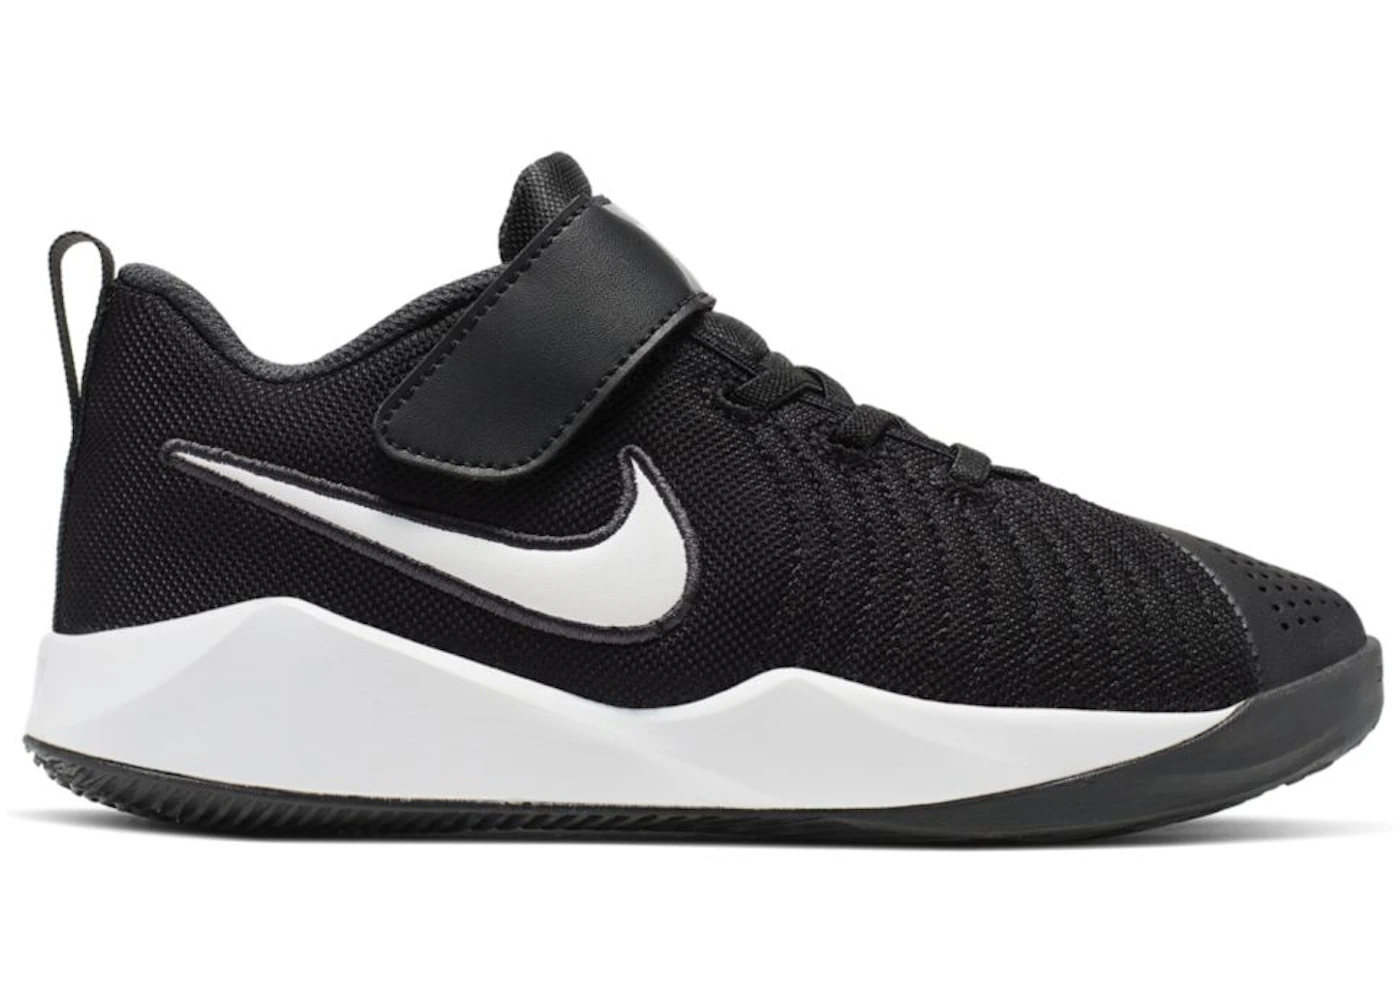 Nike Team Hustle 9 Anthracite (PS) - AT5299-002 - US